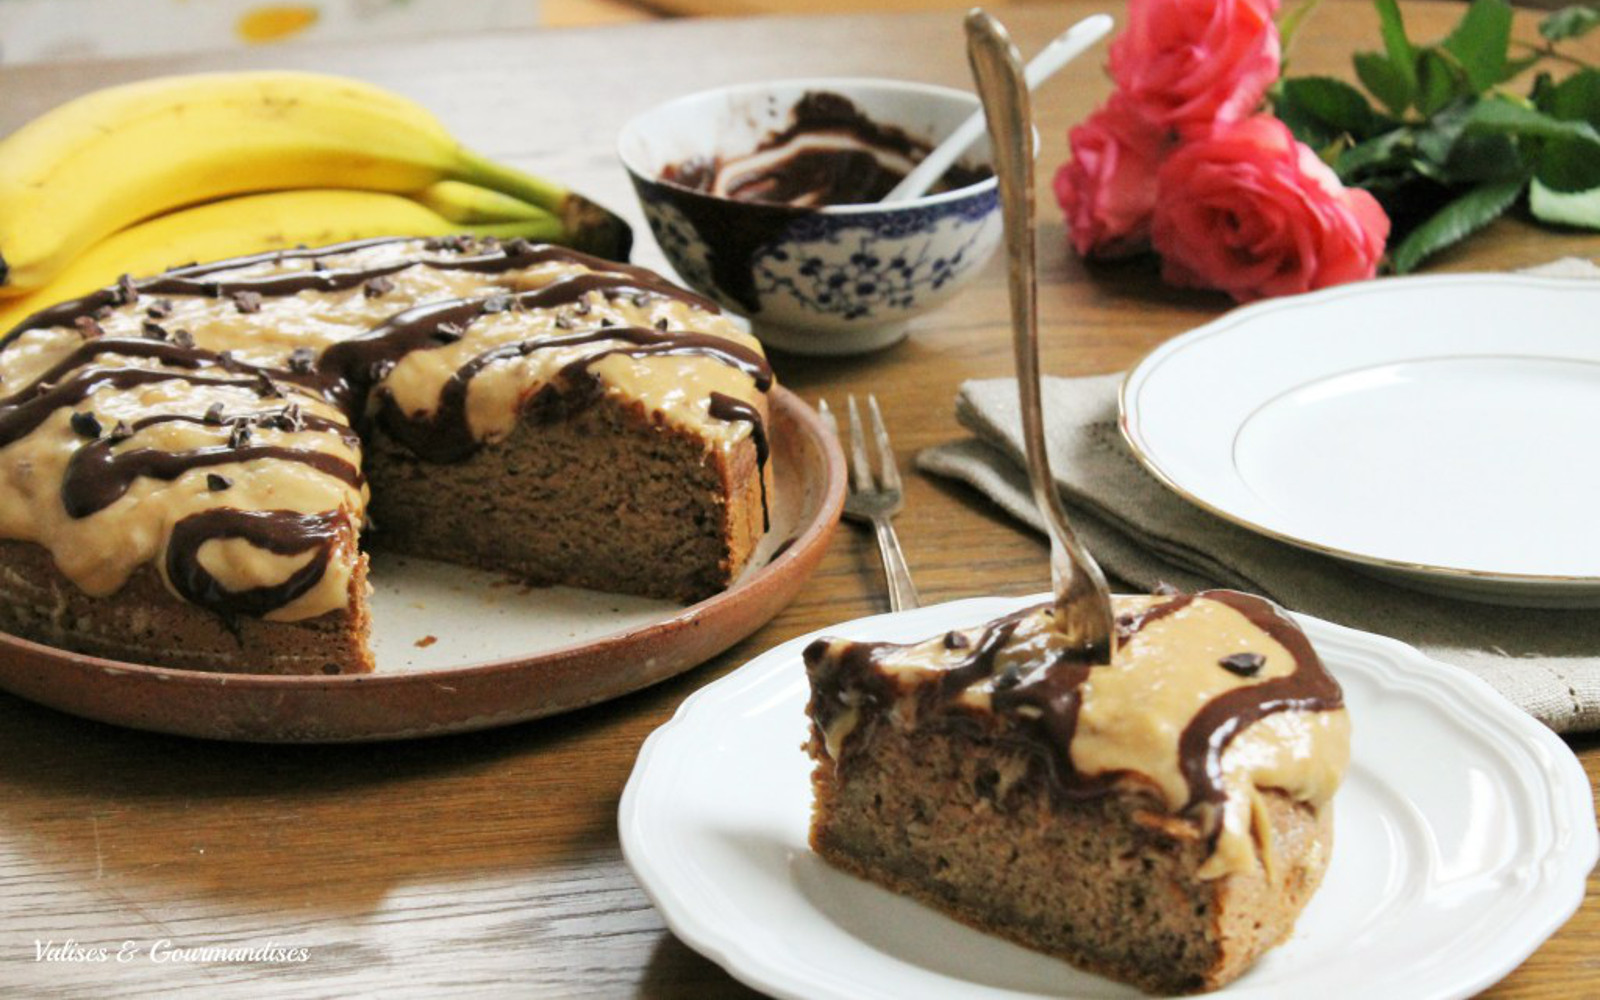 Healthy Banana Cake With Peanut Butter Frosting and Maca Chocolate Sauce